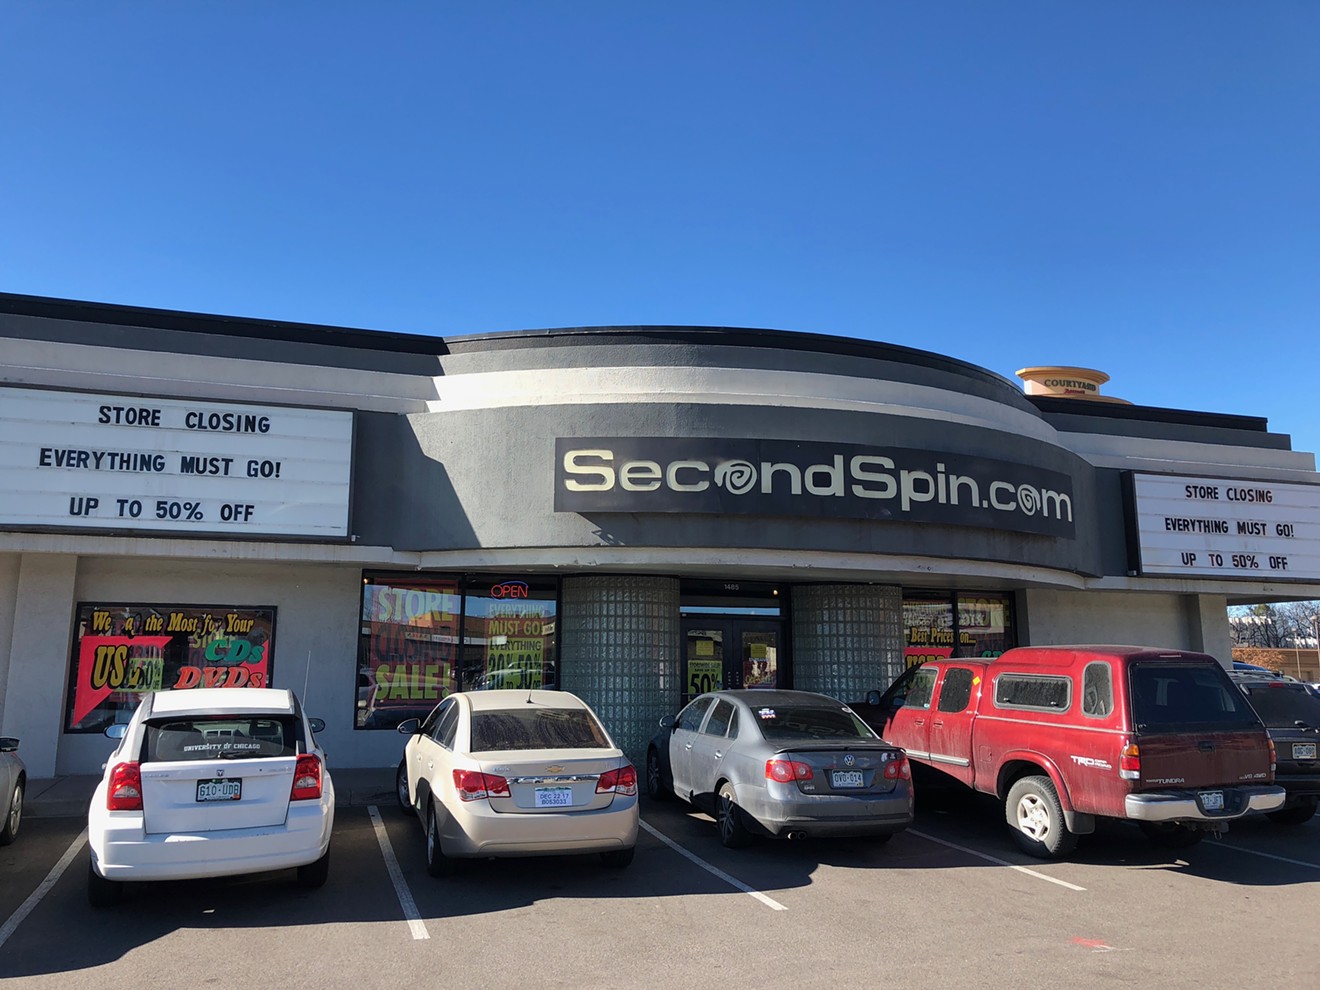 Second Spin will close its Denver location at the end of January.